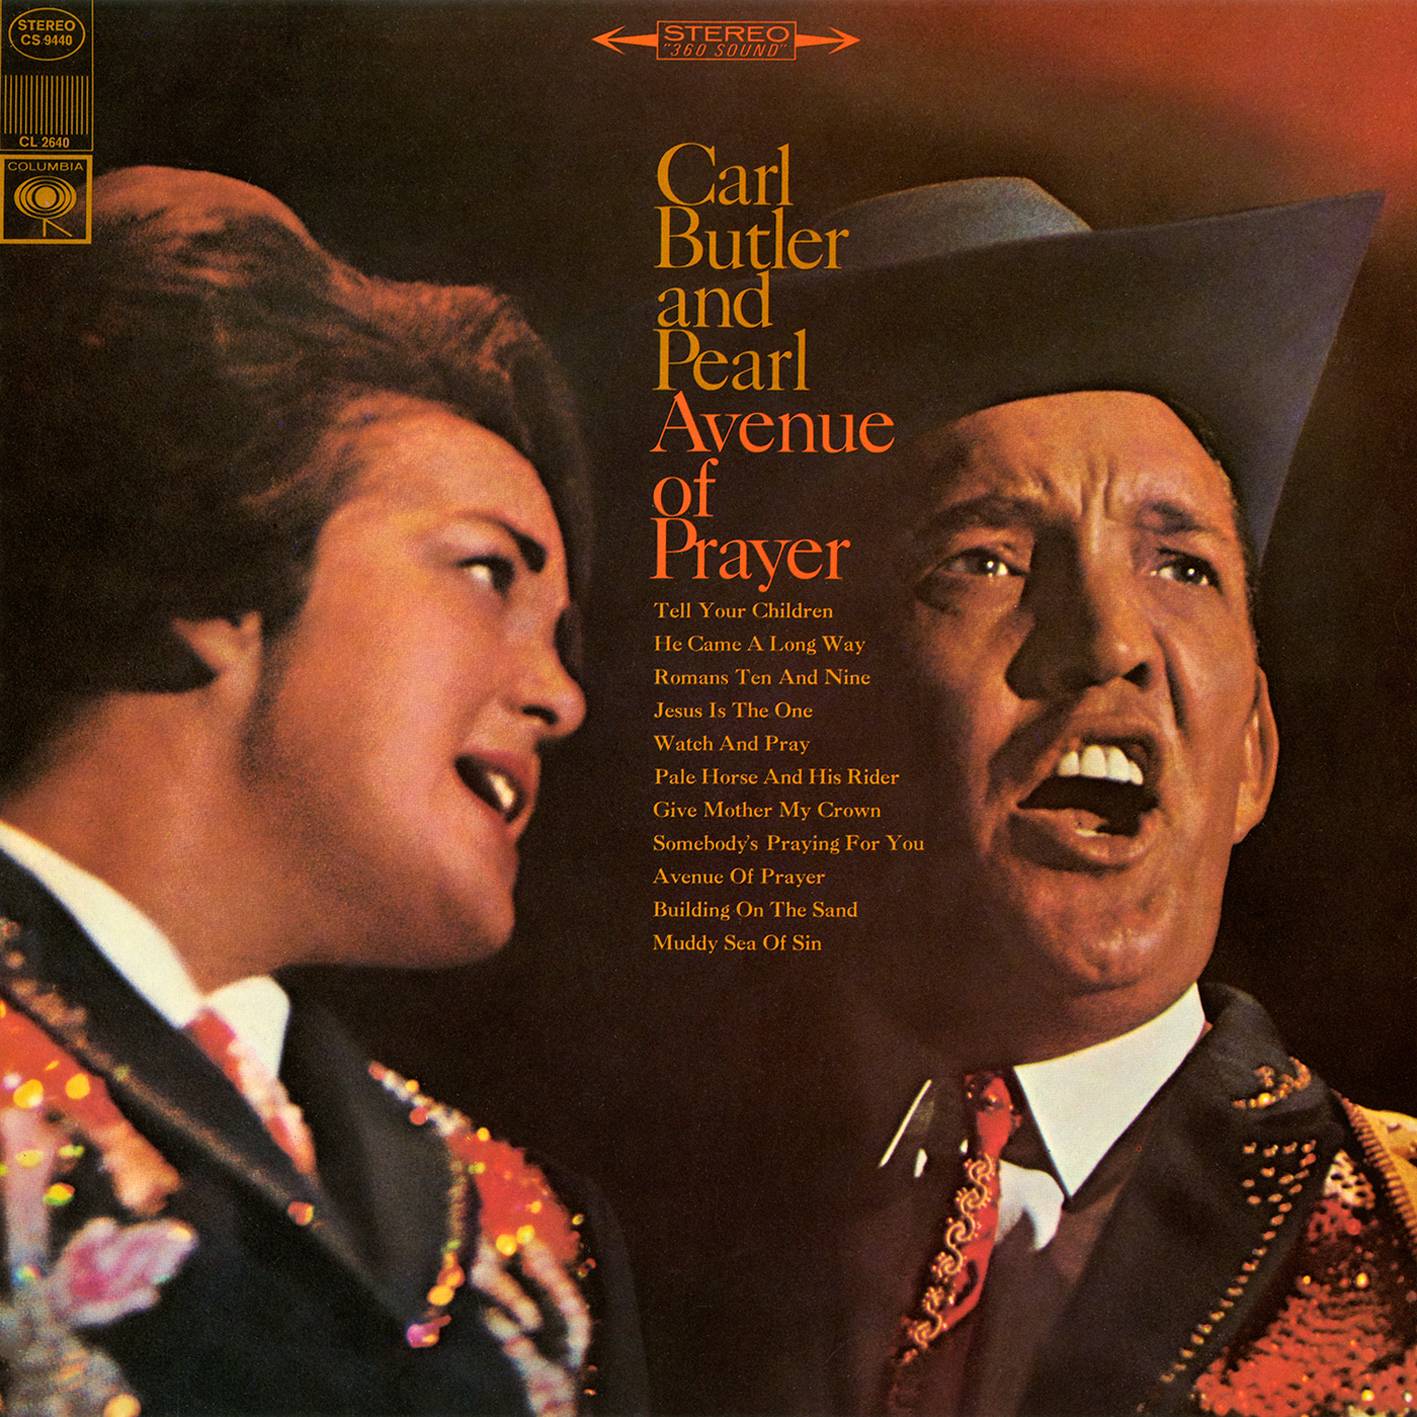 Carl Butler and Pearl – Avenue Of Prayer (1967/2017) [AcousticSounds FLAC 24bit/192kHz]